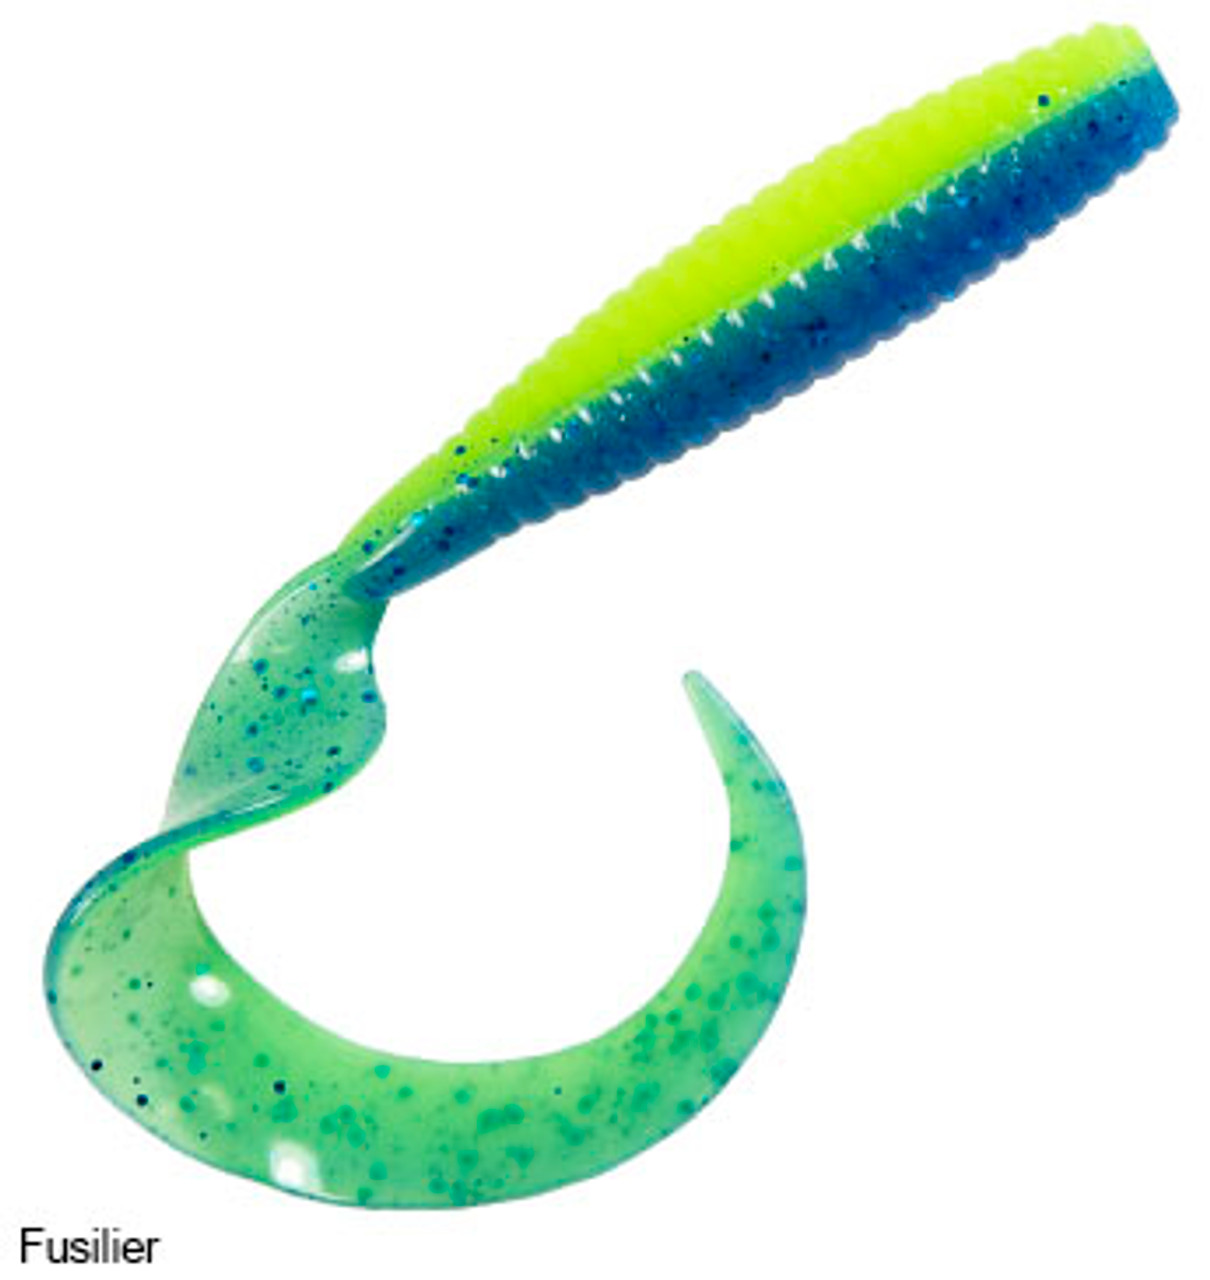 NEW: Fishing Tackle // Z Man Soft Plastics, Lures & Accessories